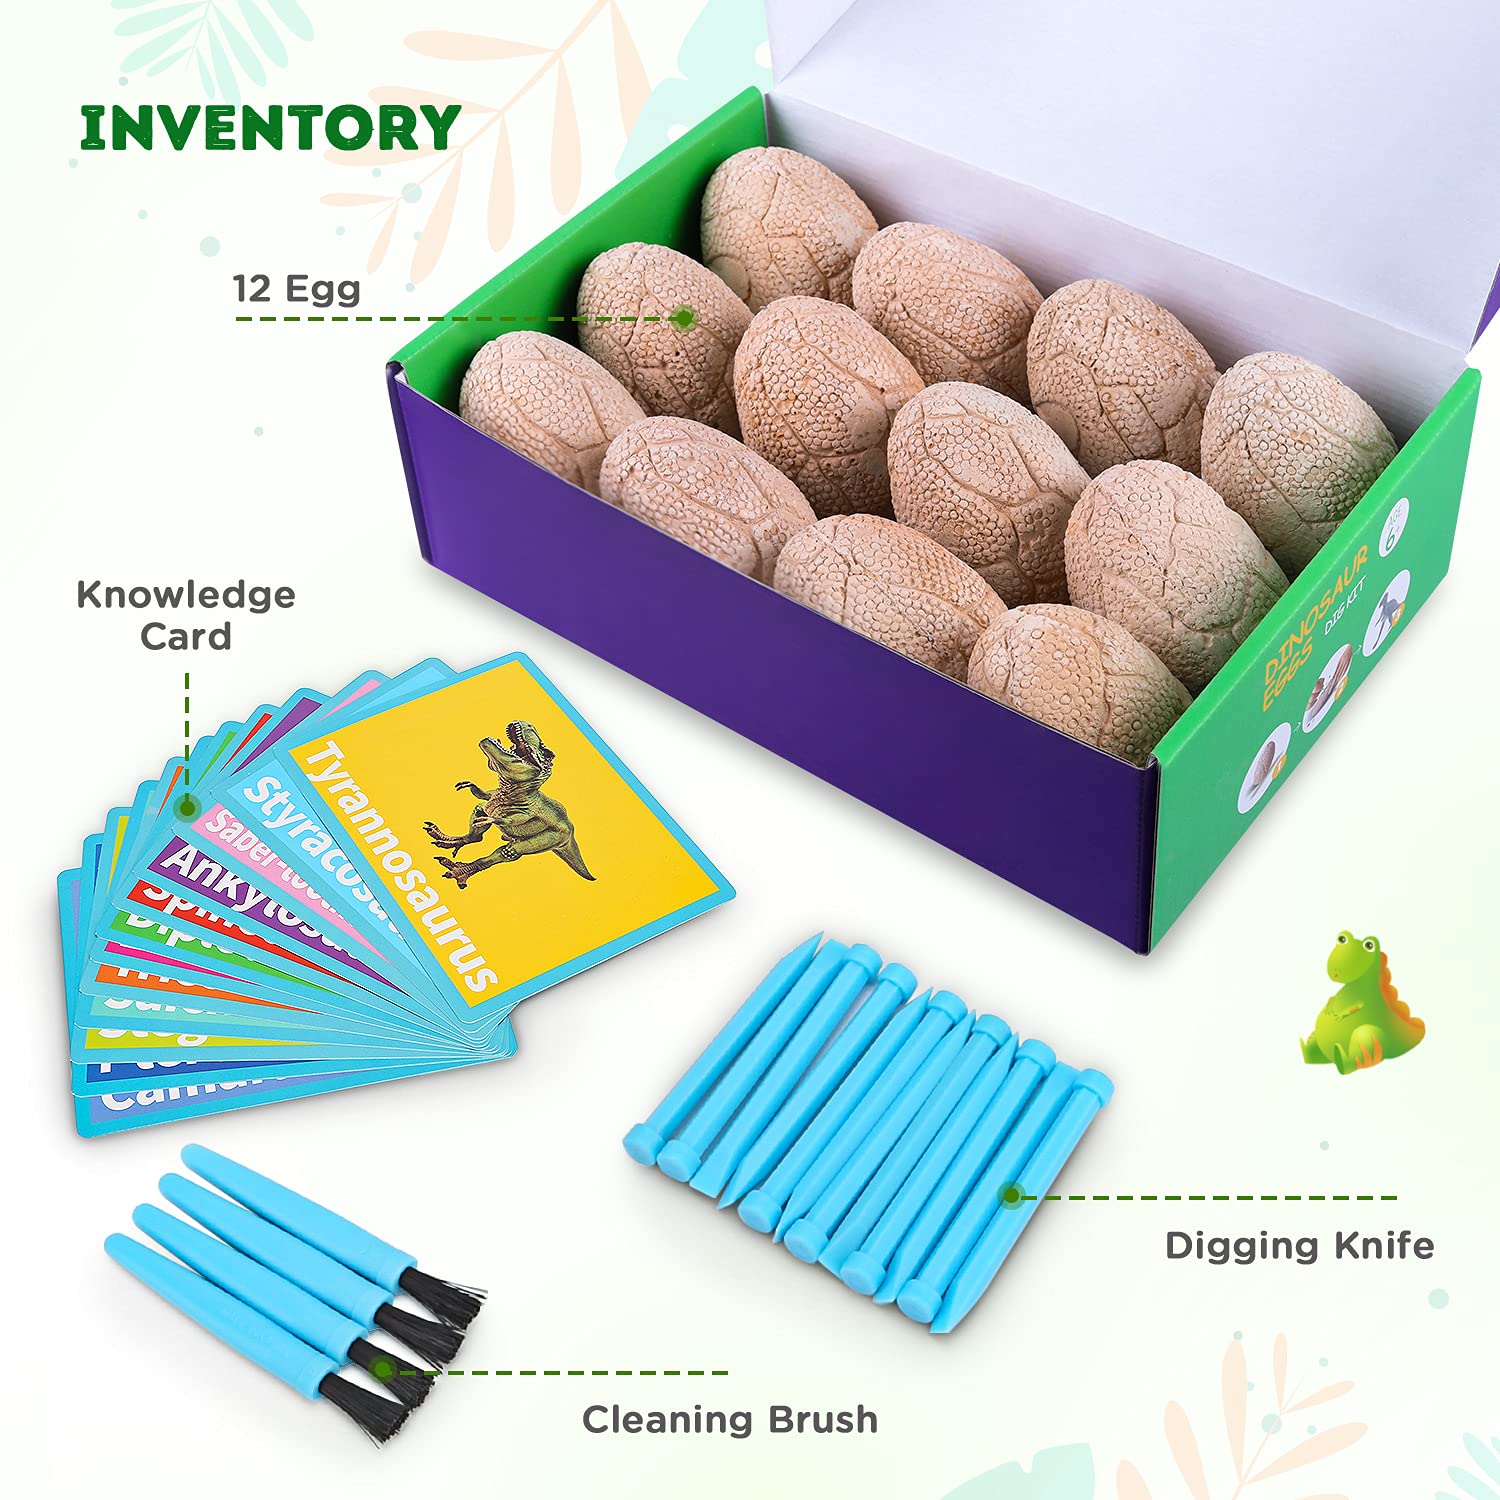 Dig Up Dinosaur Fossil Eggs, Break Open 12 Unique Dinosaur Fossil Eggs and Discover 12 Cute Dinosaurs, Funny Dinosaur Digging Toy for 3 4 5 6 7 8 9-12 Year Old Boys Archaeology Science STEM Gift